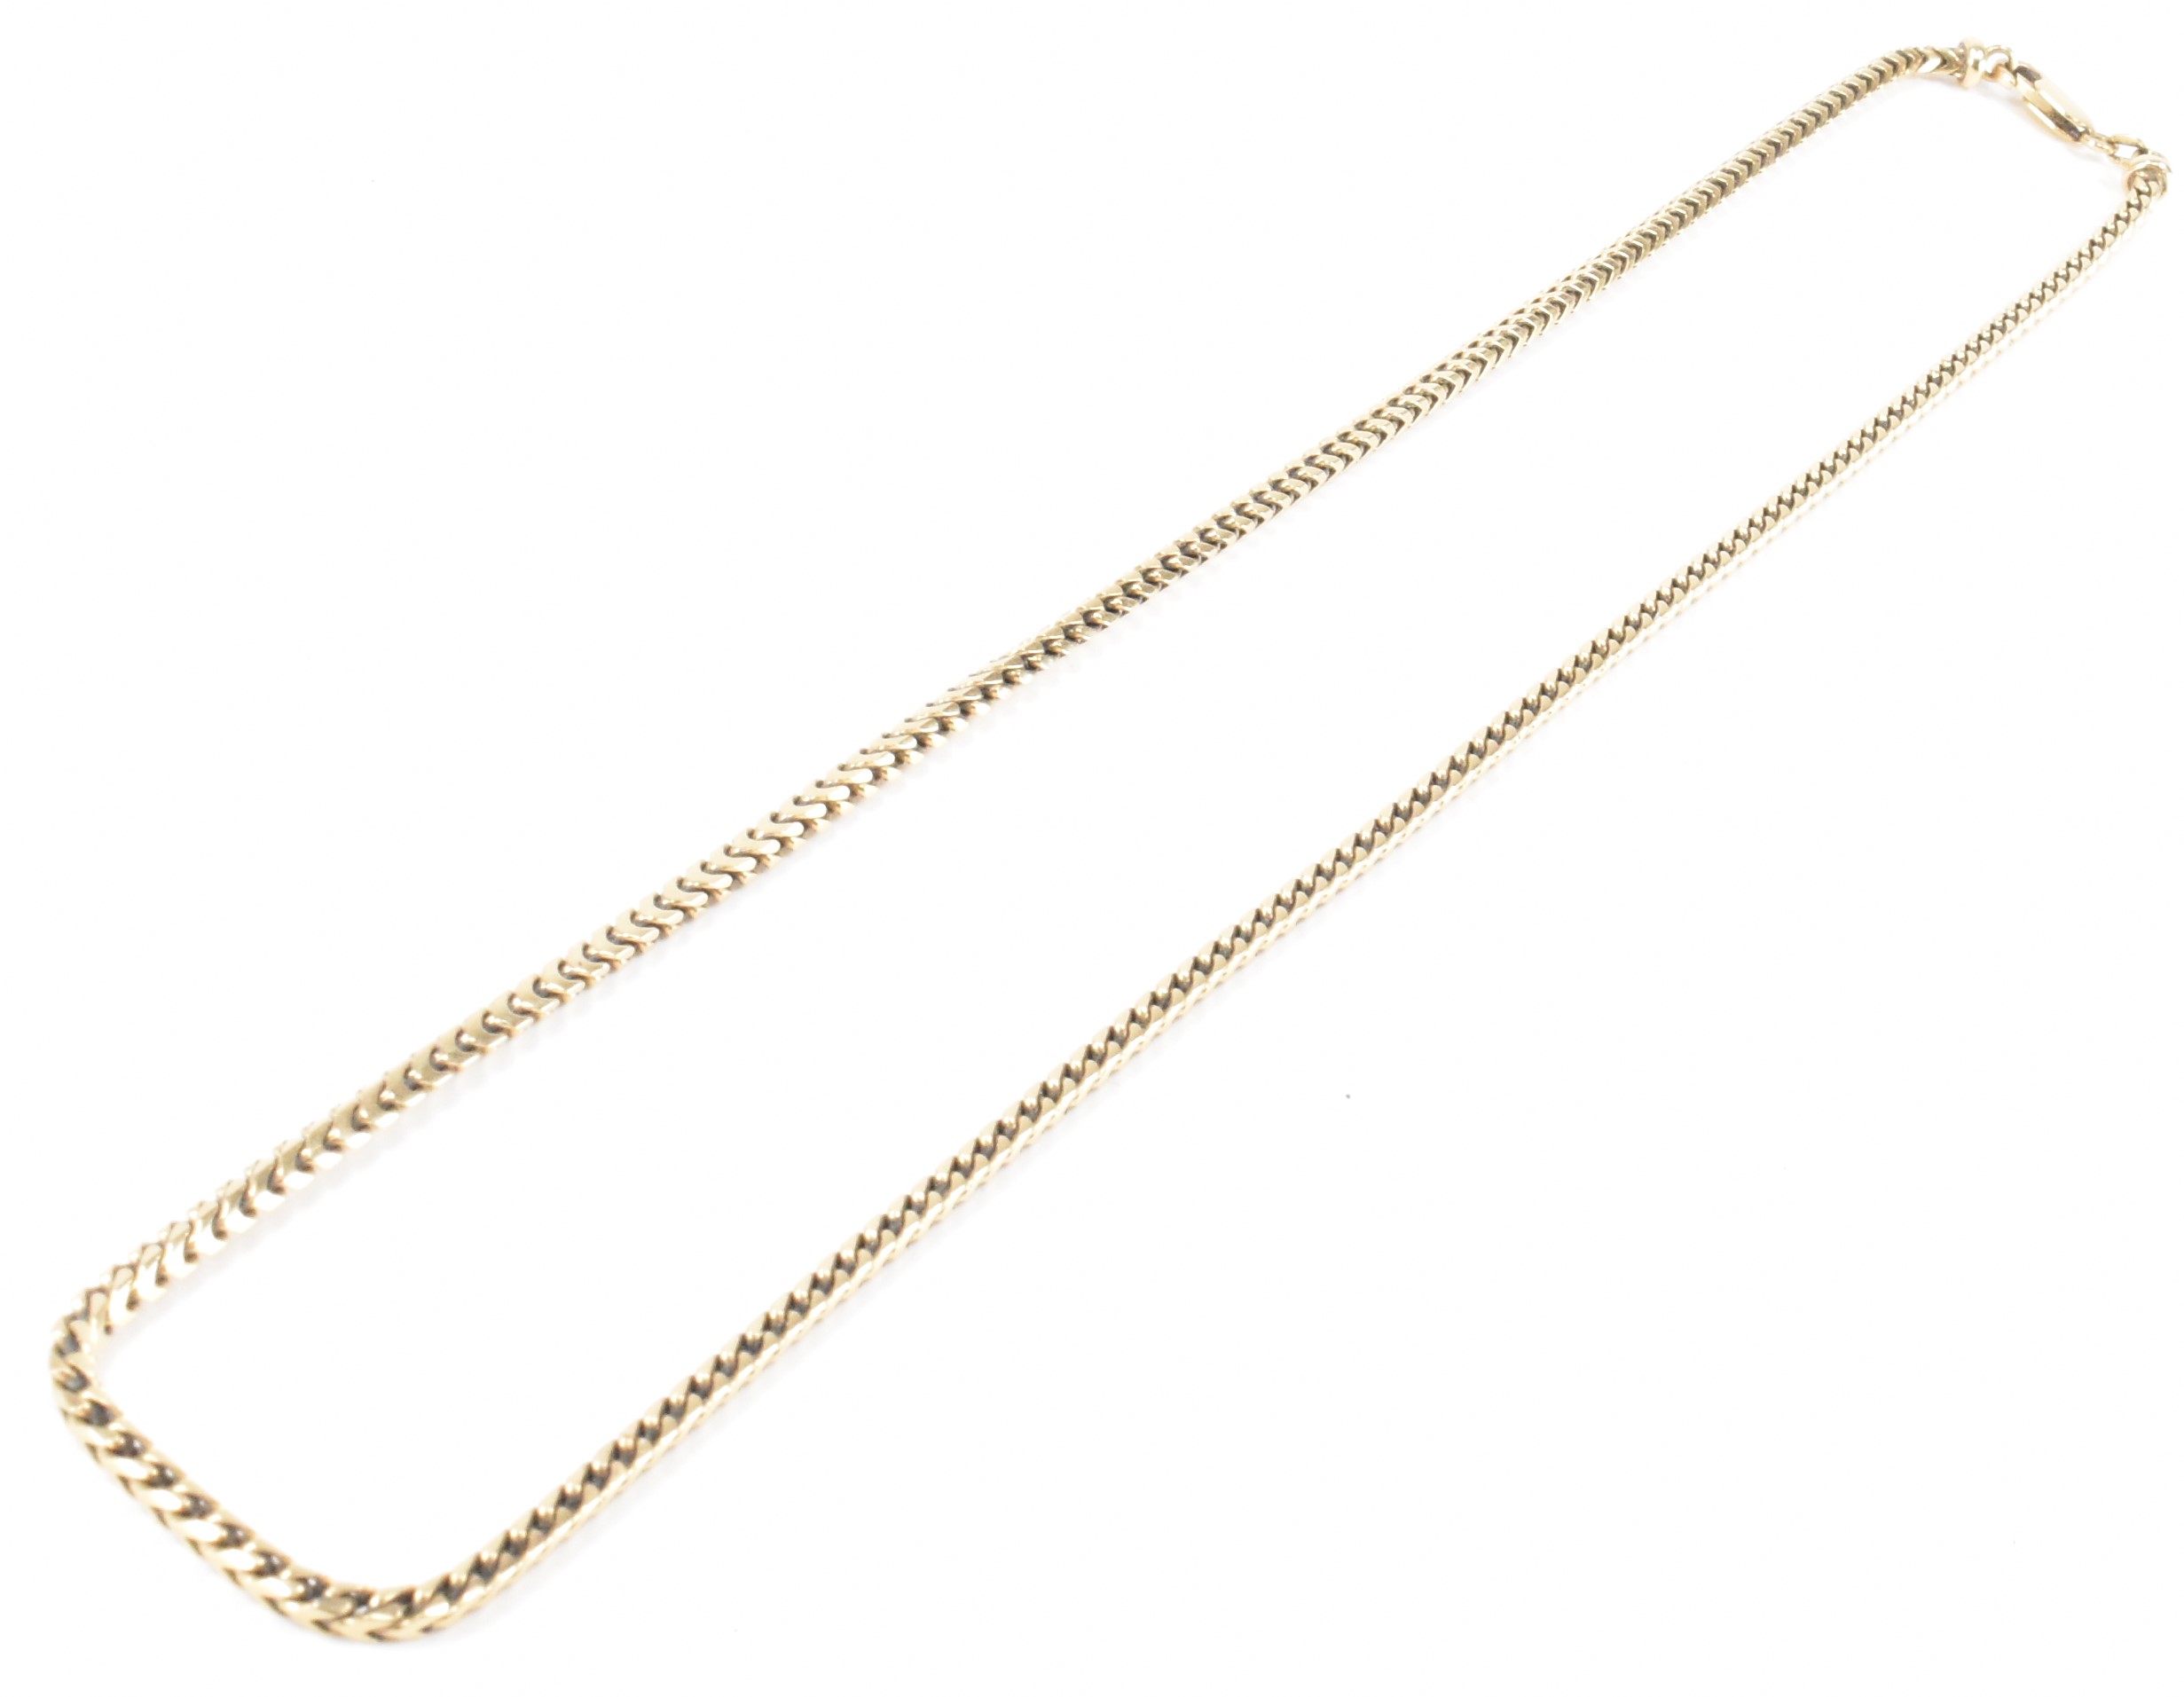 HALLMARKED 9CT GOLD FOUR SIDED CURB CHAIN